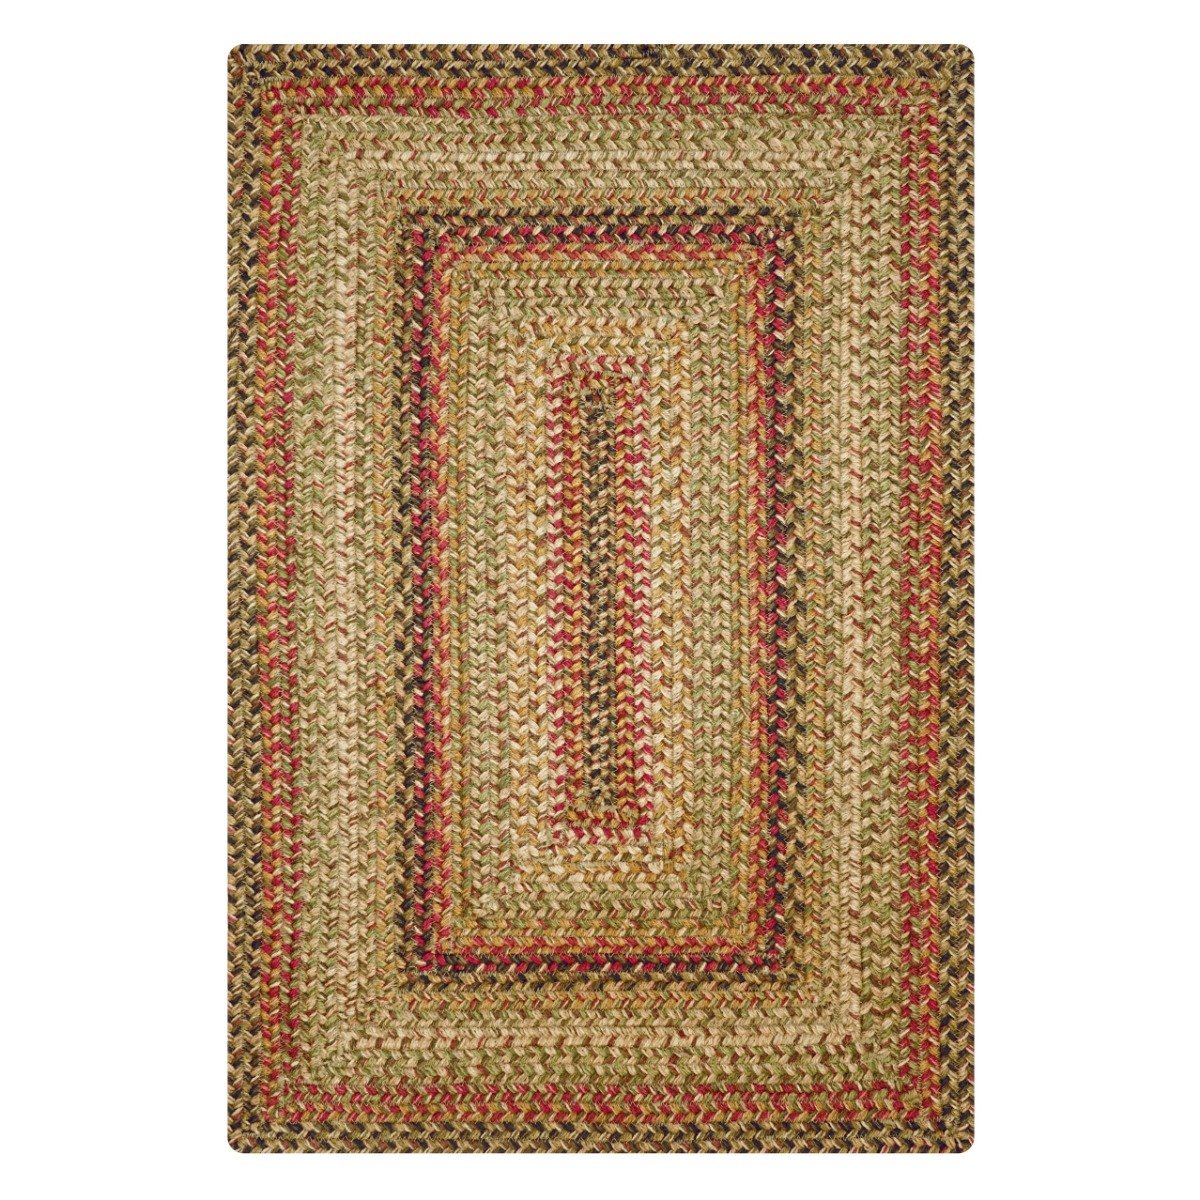  Homespice 20x30” Multi Color Rect. Braided Rug. Kingston Multi  Color and White Jute Rug. Uses- Entryway Rugs, Kitchen Rugs, Bathroom Rugs.  Reversible, Rustic, Country, Primitive, Farmhouse Decor Rug: Home & Kitchen